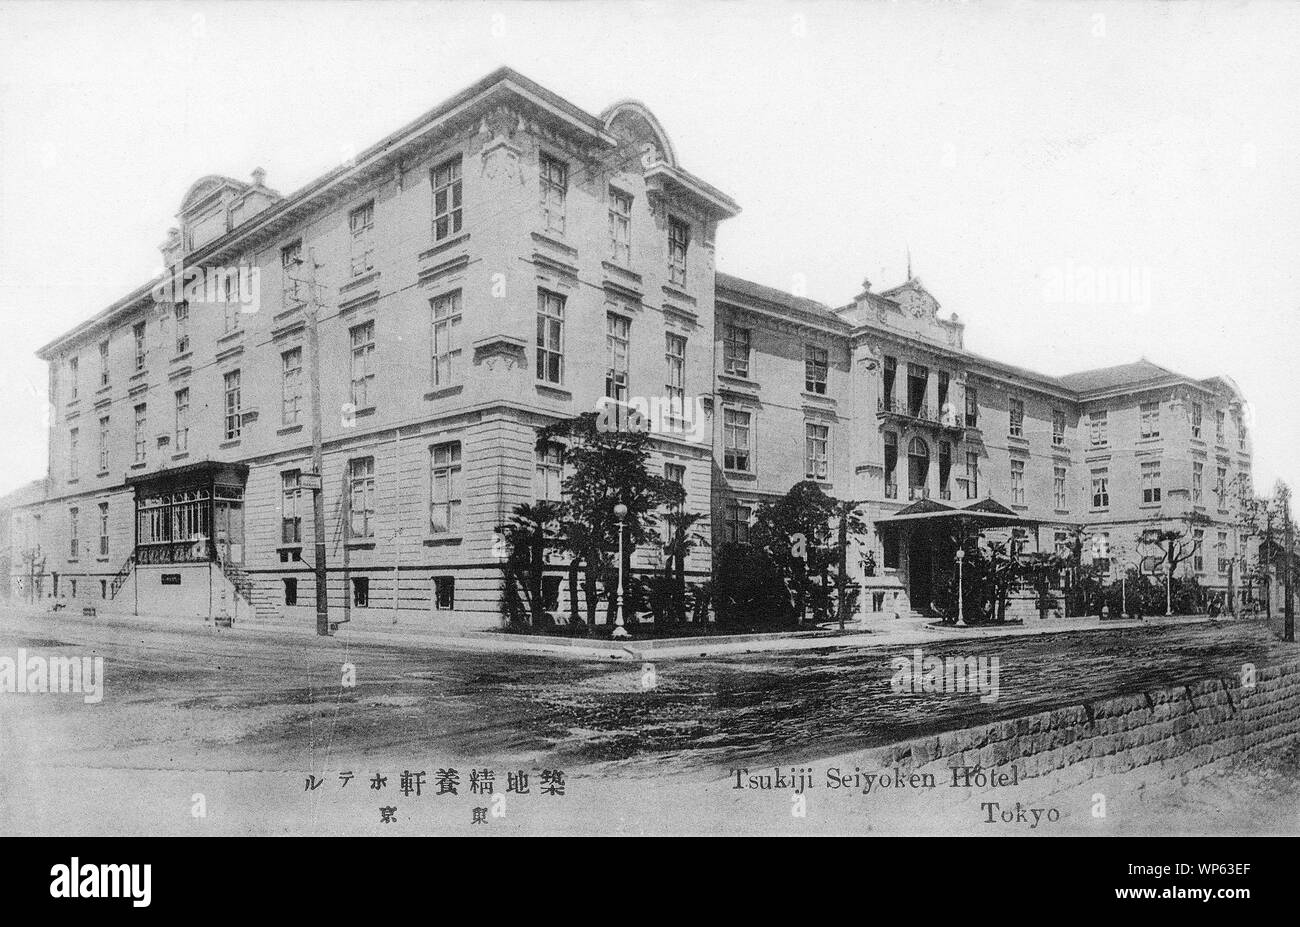 [ 1910s Japan - TITLE ] —   The Tsukiji Seiyoken Hotel in Tokyo, the first Western-style hotel owned and managed by Japanese.  Opened in 1872 at the Foreign Settlement in Tsukiji by Shigetake Katamura, its importance diminished after 1899 when foreigners were allowed to live anywhere in Tokyo.  The three story building in this image was built in 1909. It was destroyed by the Great Kanto Earthquake of 1923.  20th century vintage postcard. Stock Photo